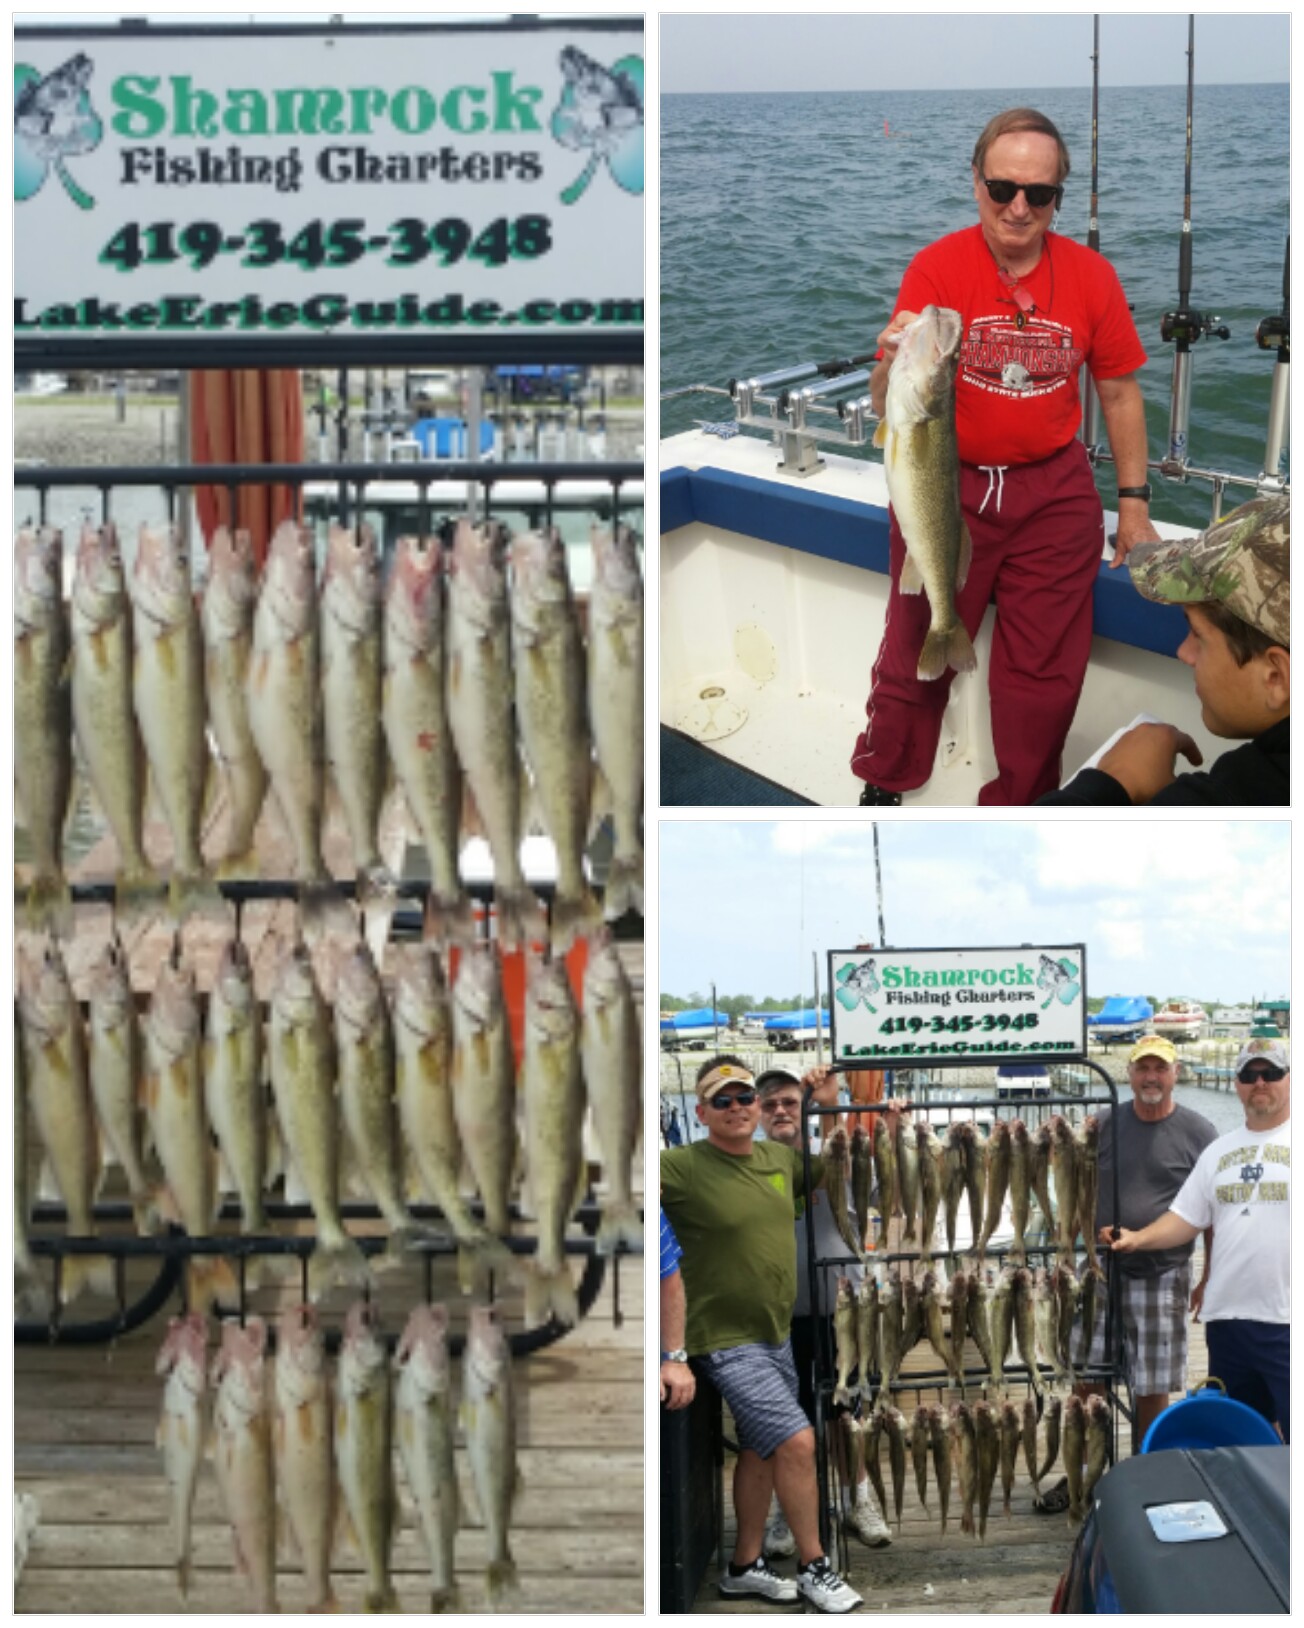 Lake Erie Walleye Rates: Book Your Fishing Charter Today!